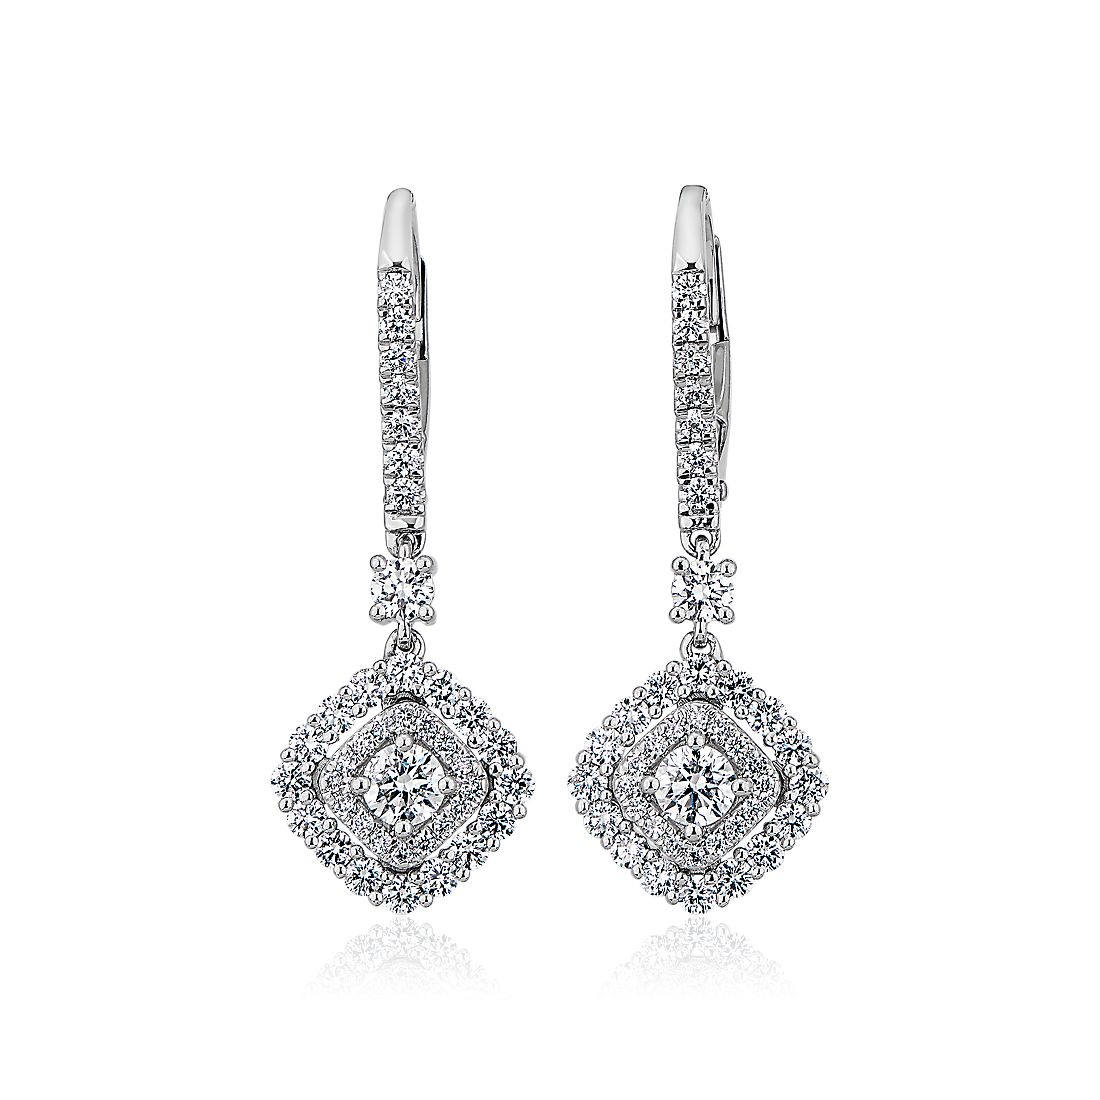 East West Cushion Halo Drop Earrings in 14k White Gold (1 ct. tw.)